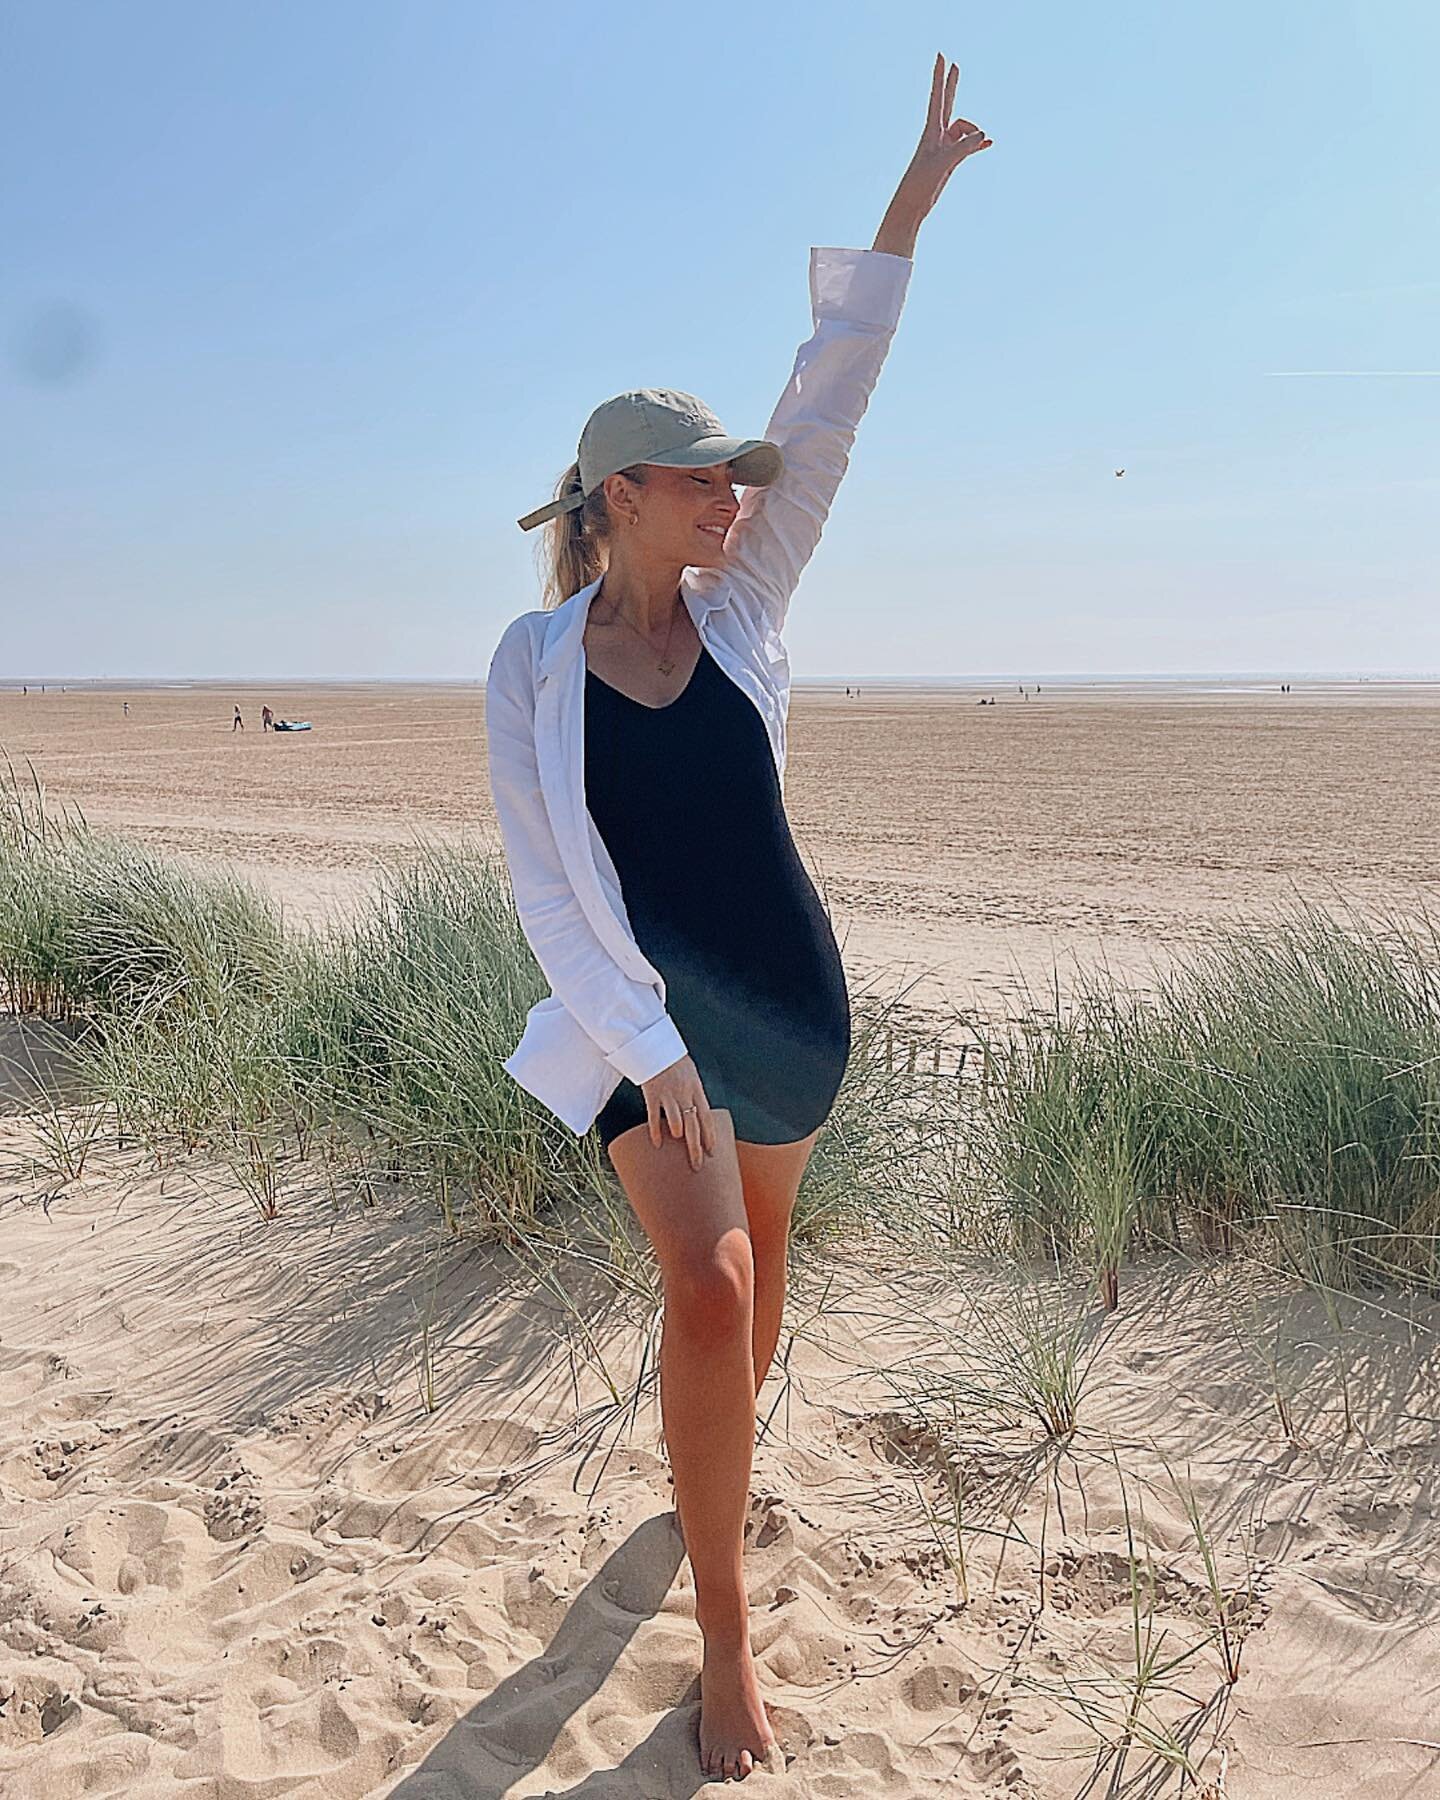 Summer is here and here&rsquo;s your reminder to have some balance! 🫶🏼👇🏼

As a soul-led entrepreneur, taking inspired action and enjoying the things that light you up is essential. Don't be too hard on yourself, let go, and embrace your feminine 